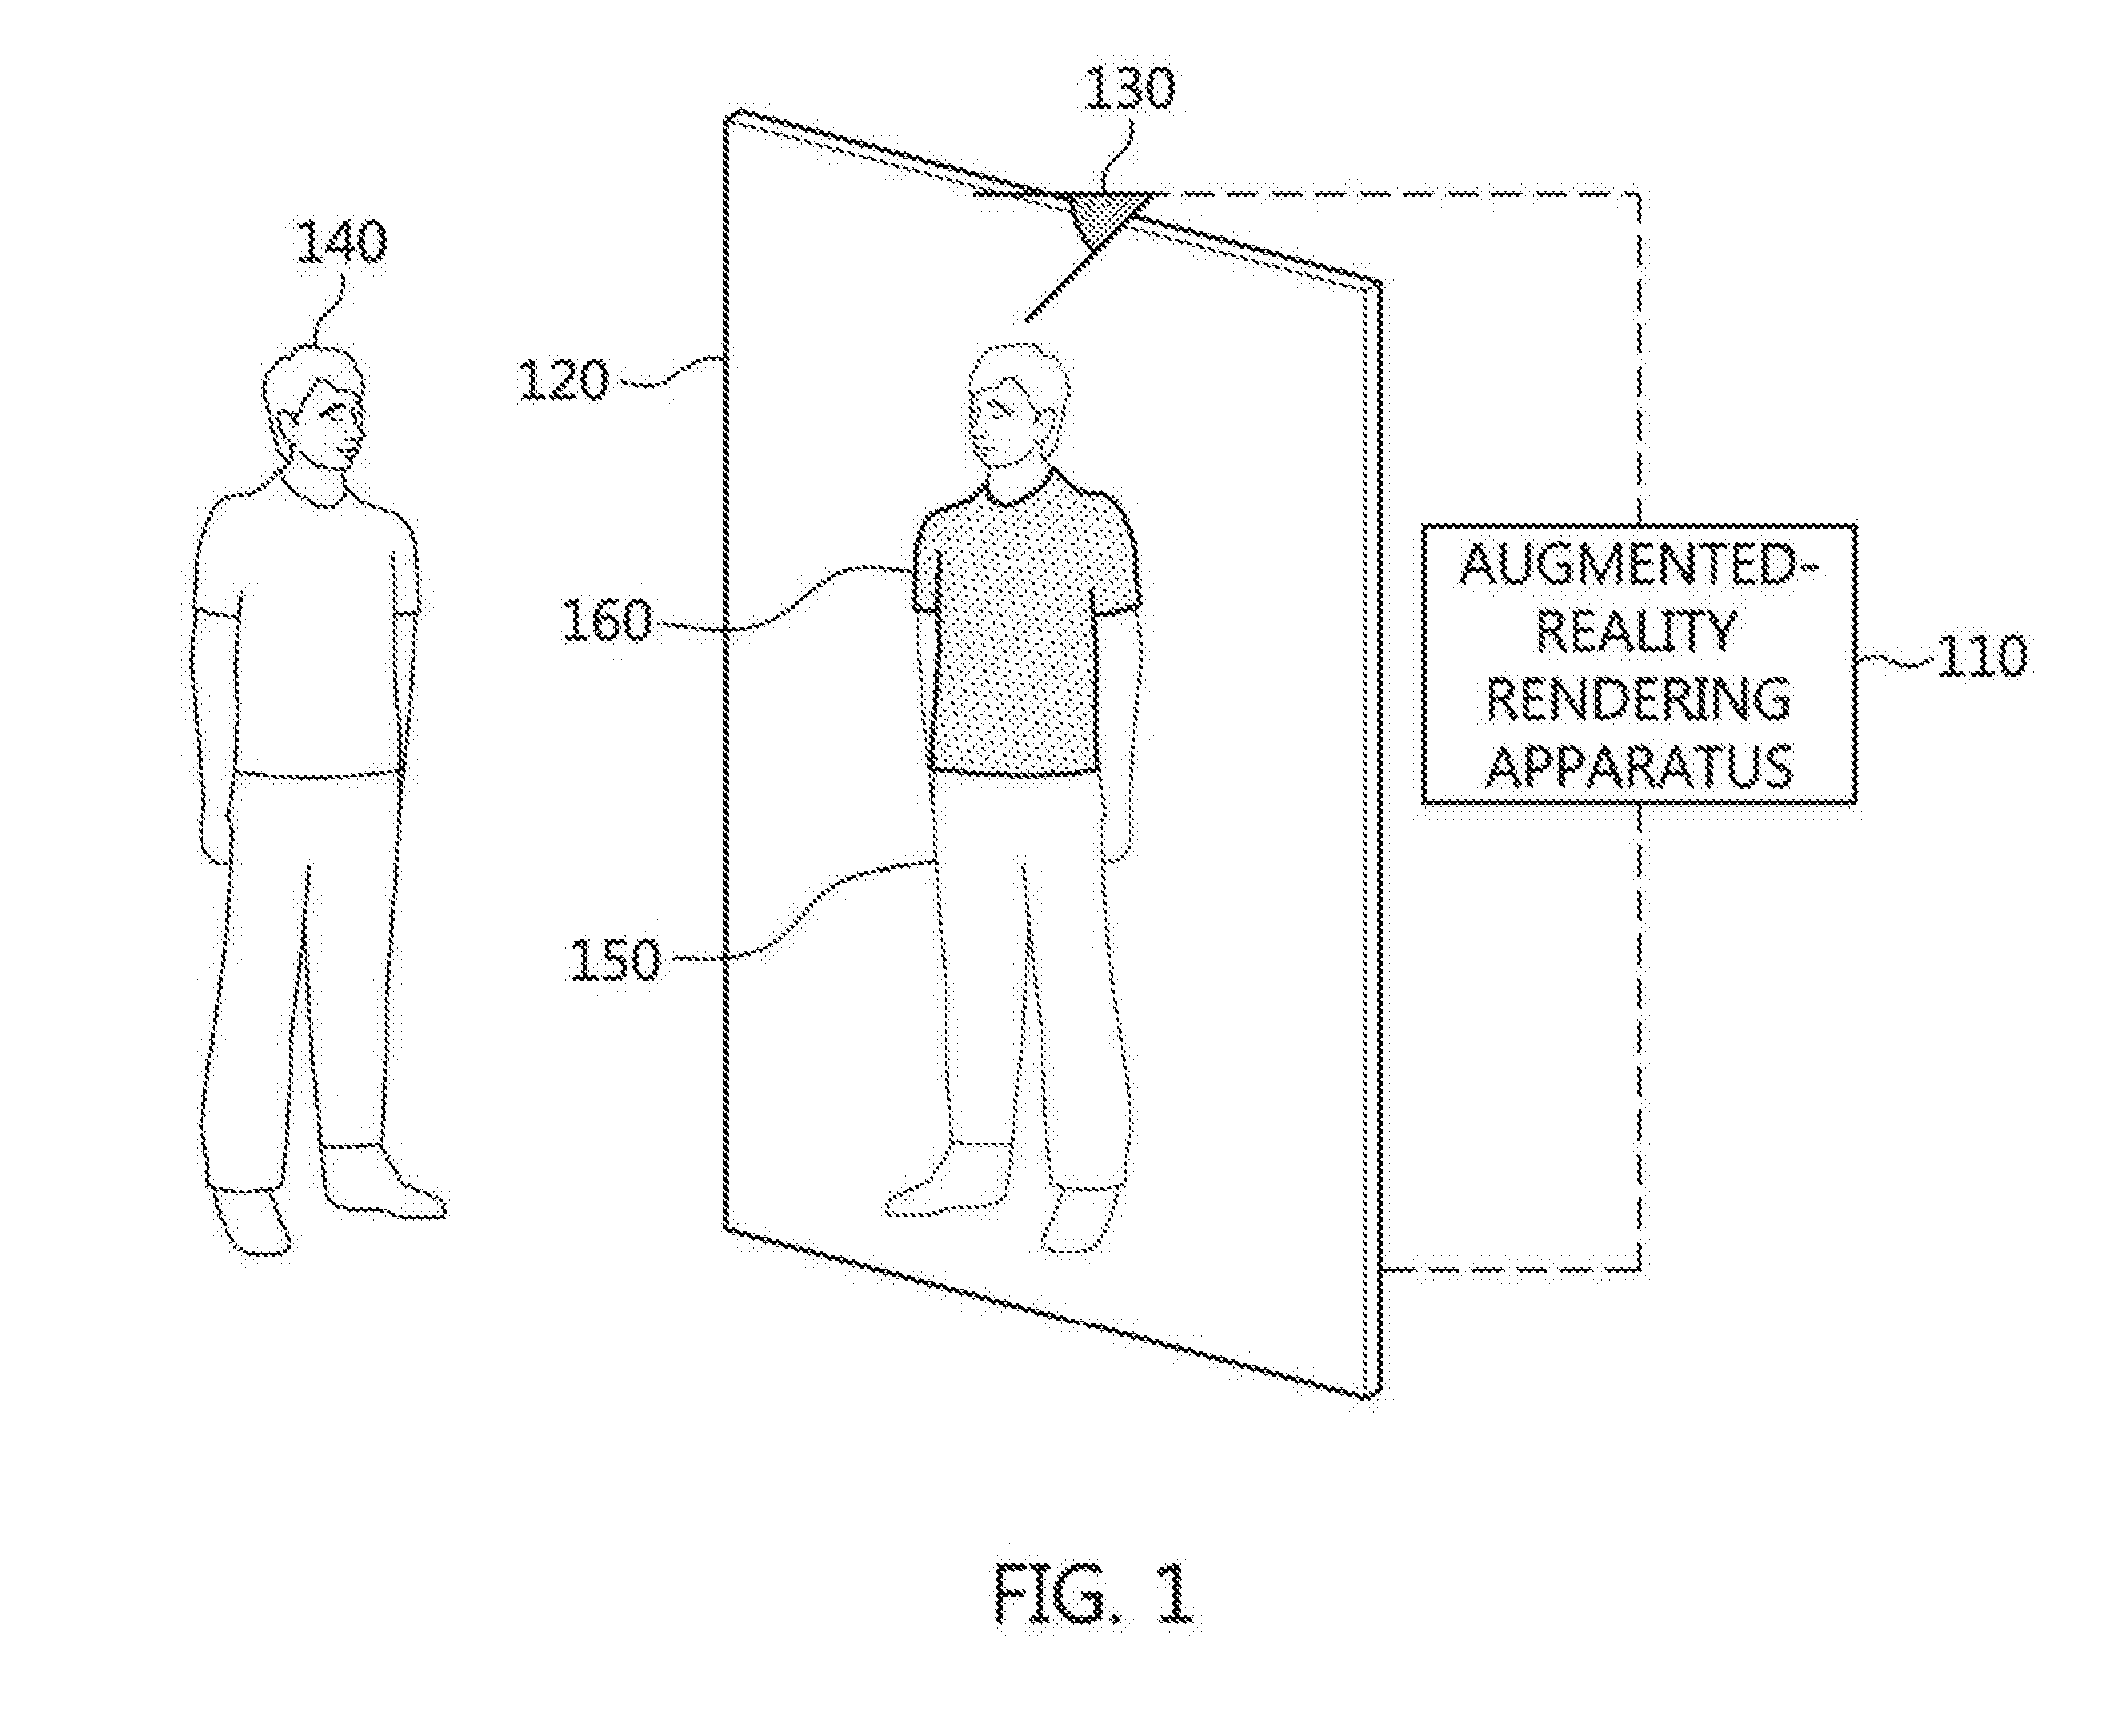 Method and apparatus for augmented-reality rendering on mirror display based on motion of augmented-reality target